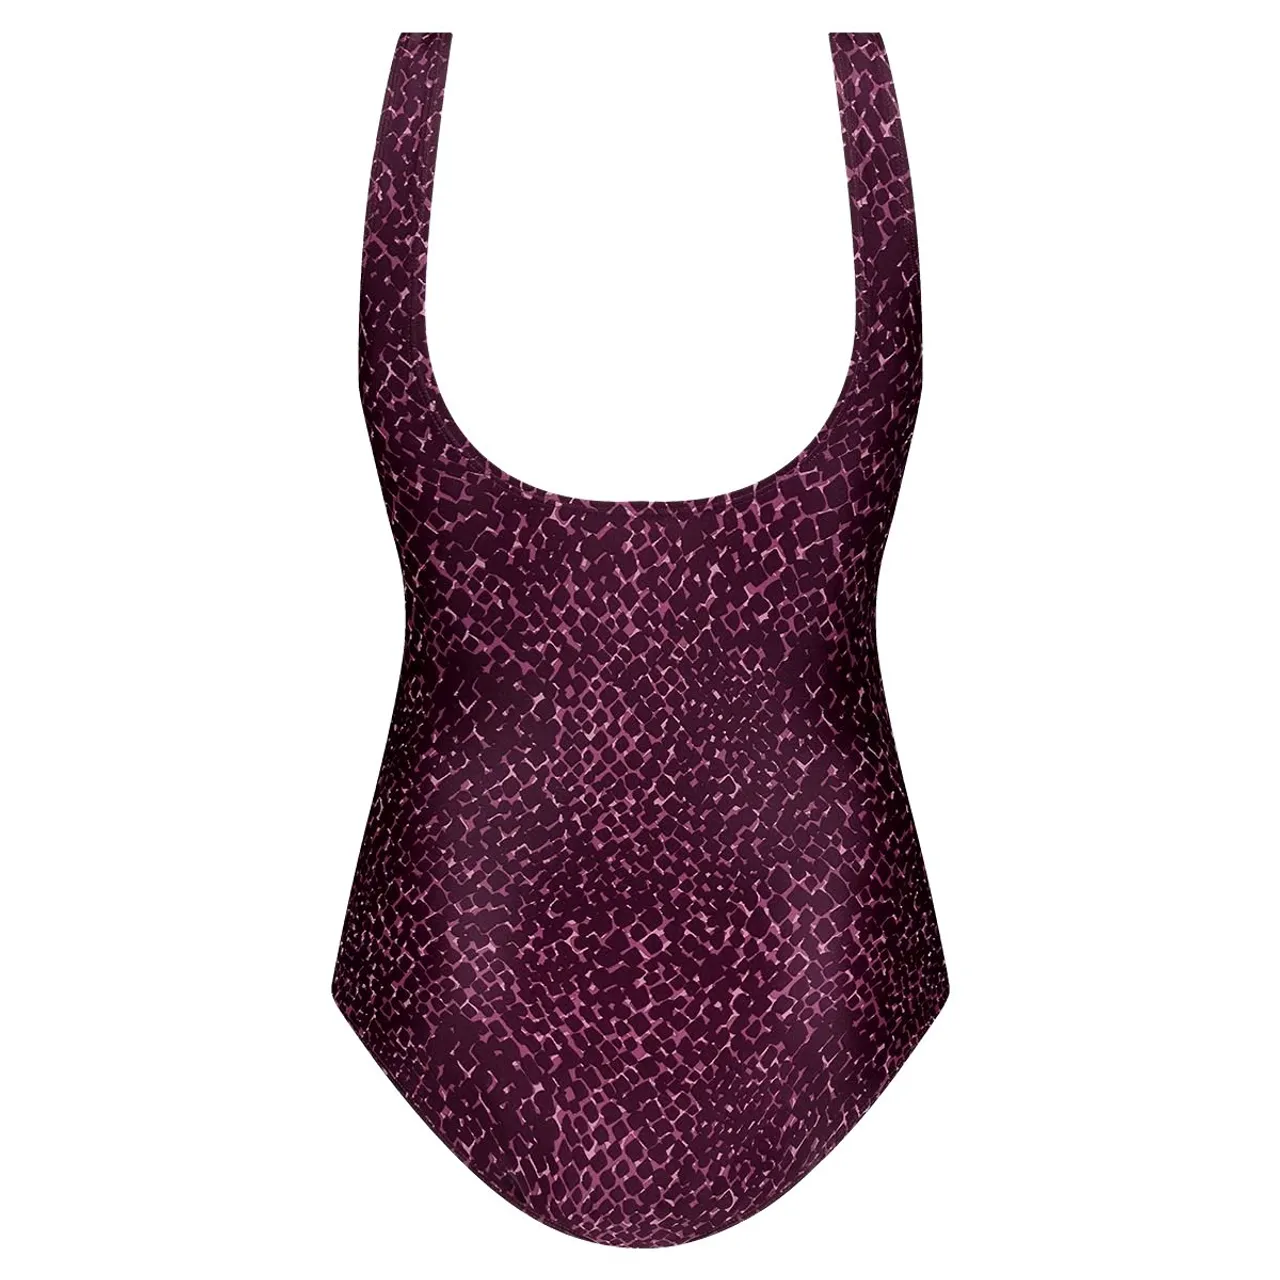 Ten Cate swimsuit soft cup shape -